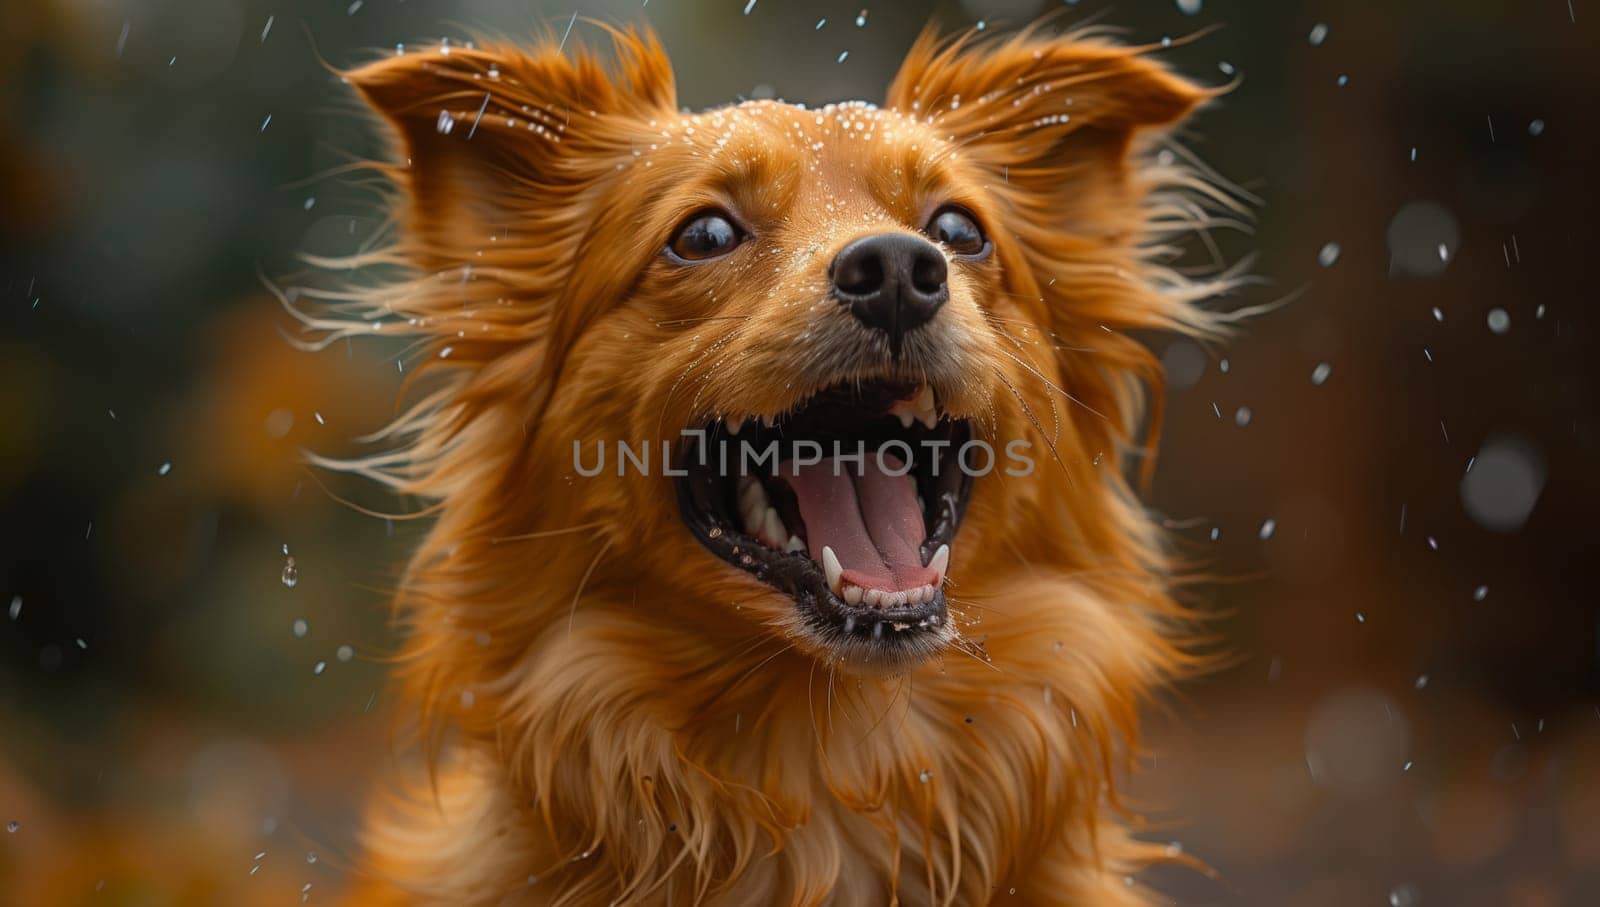 An image capturing a closeup of a brown Sporting Group dog with its mouth open, showcasing its whiskers, snout, and fur. A carnivorous Canidae companion dog in a playful event